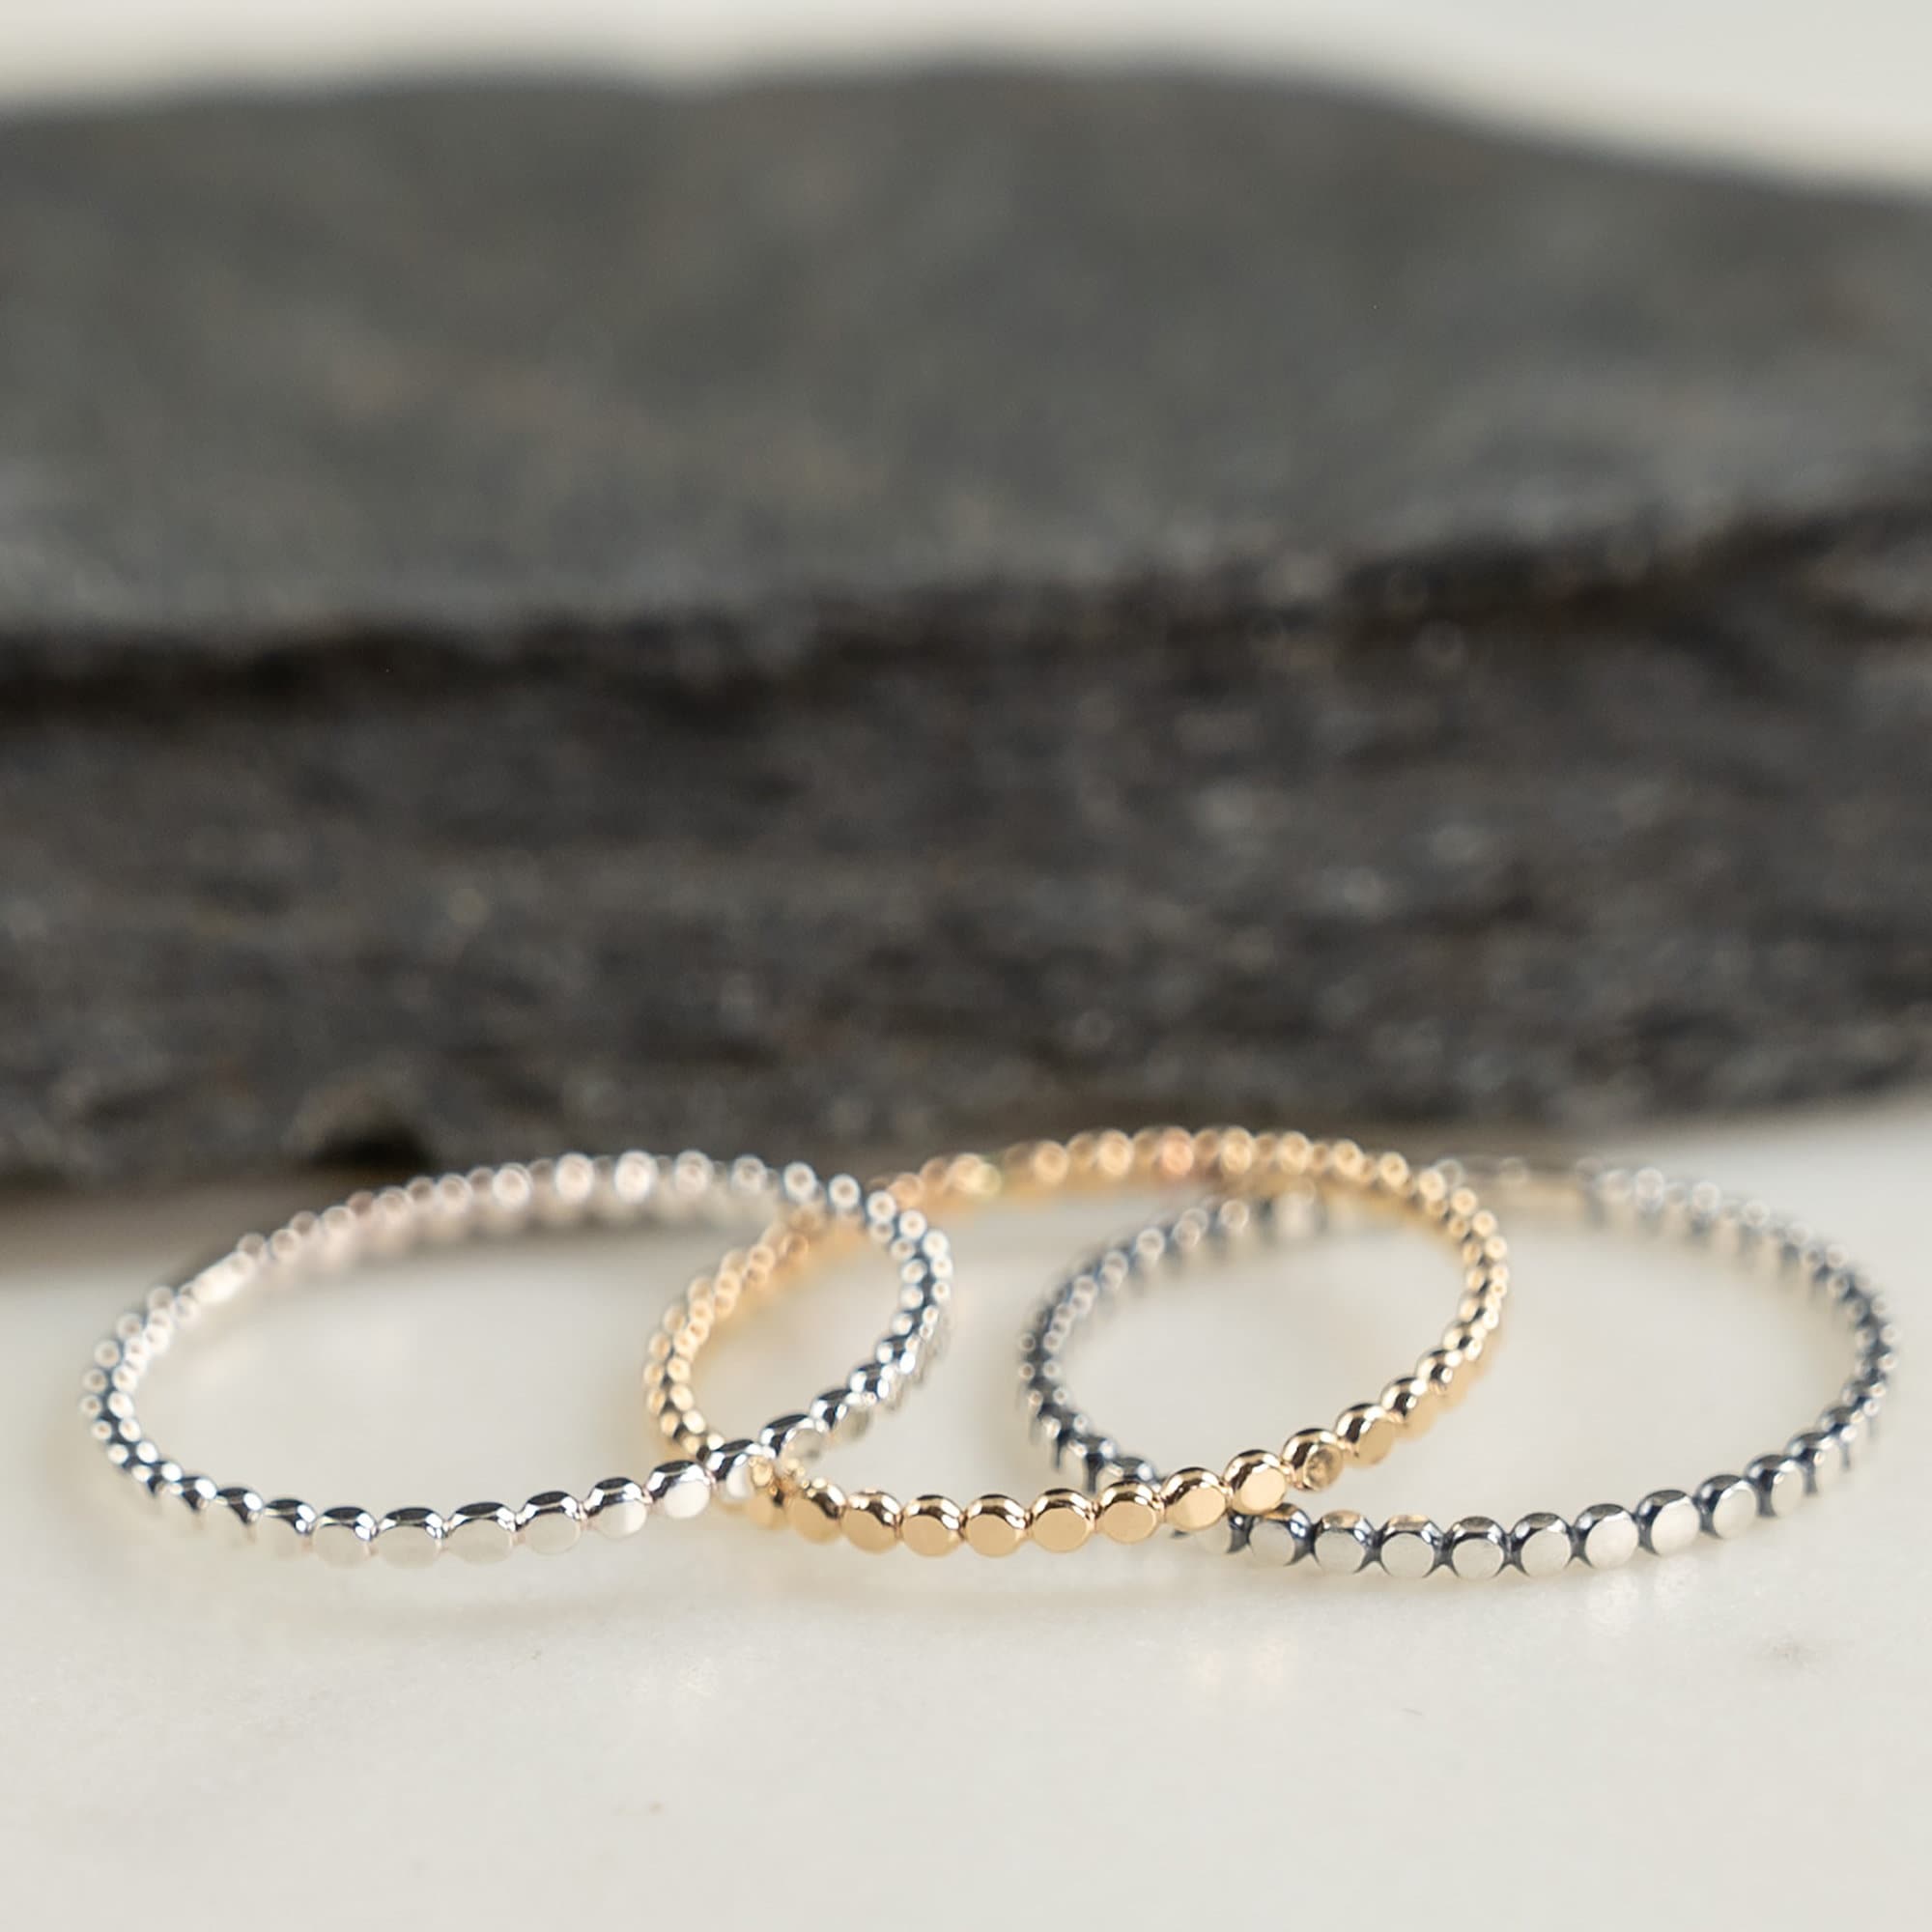 Beaded wire stacking ring, pick 1. Gold filled or sterling silver